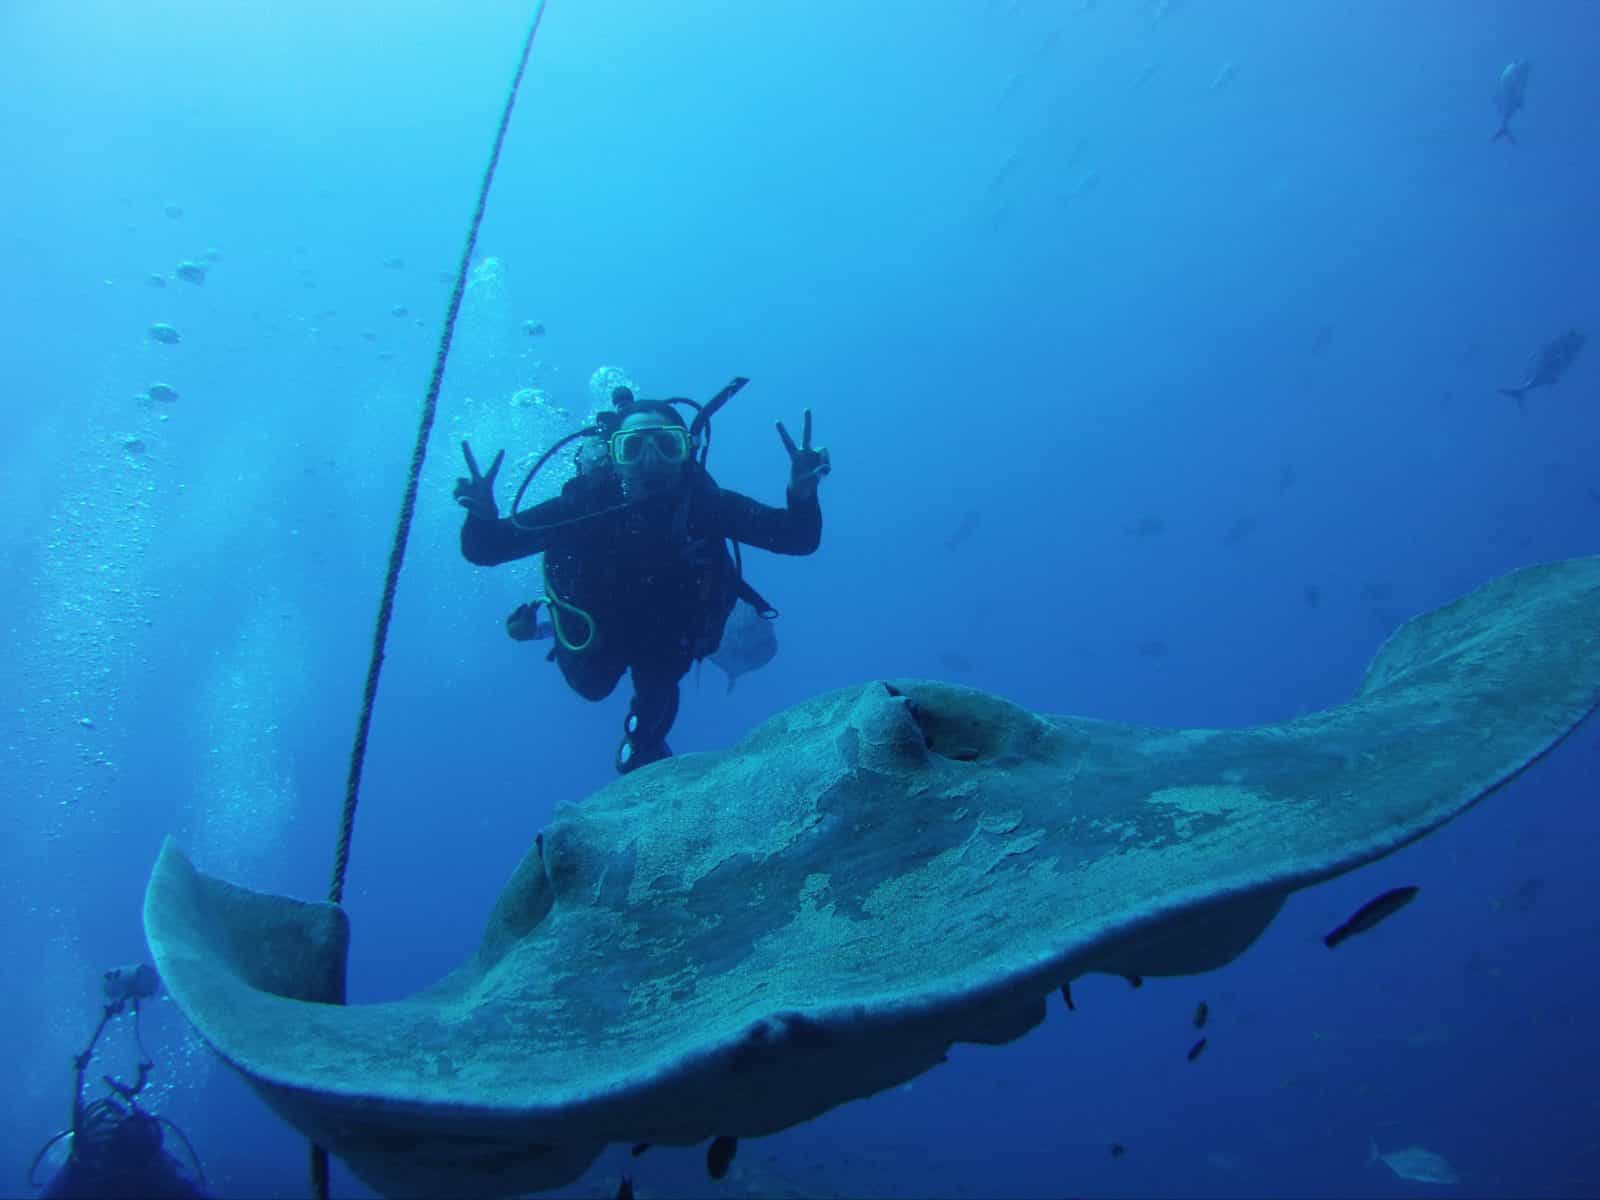 Giant Rays are regular visitors